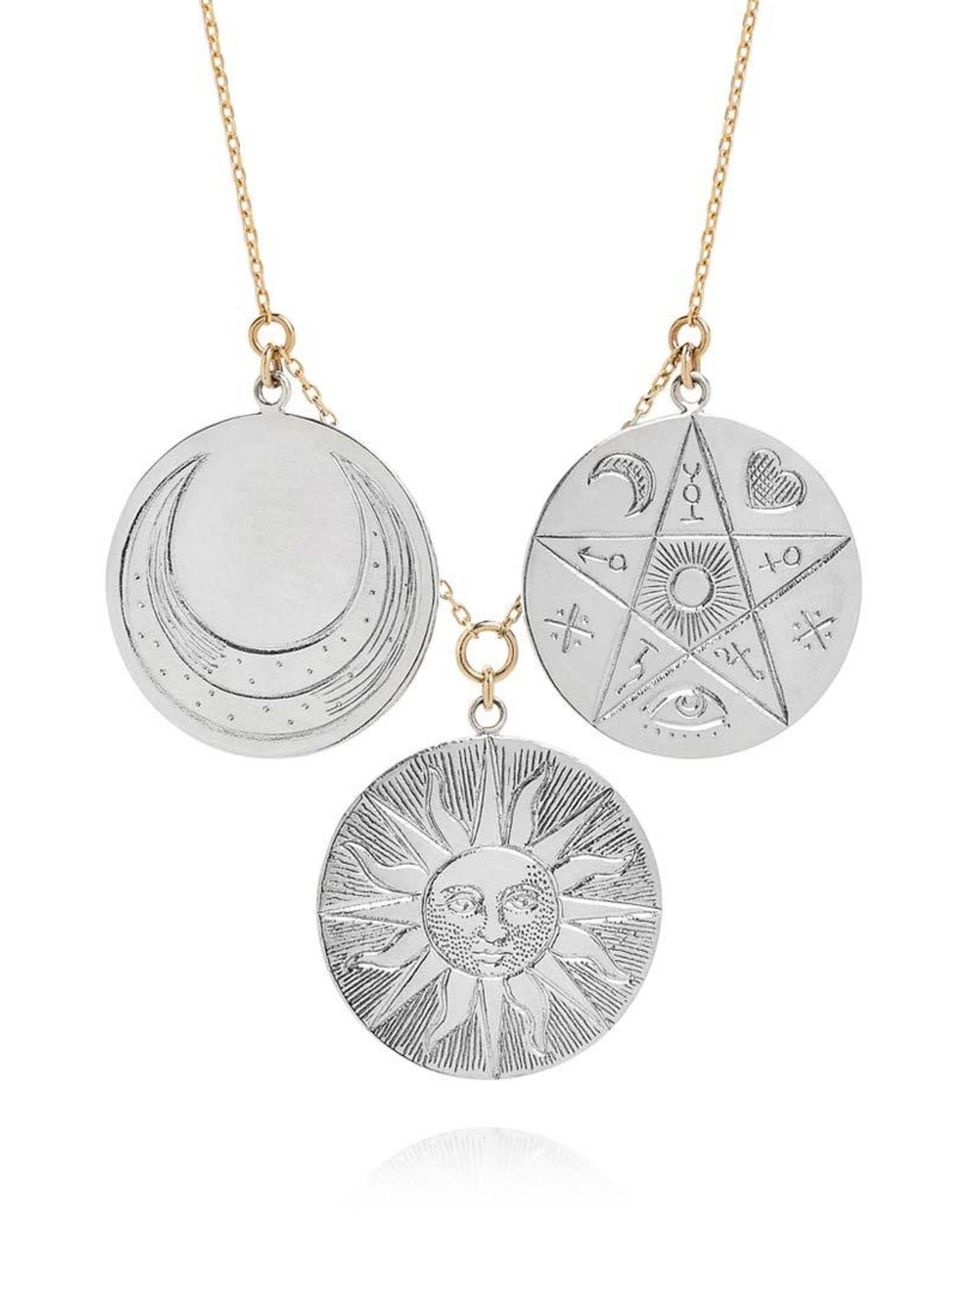 <p>Laura Lee's beautiful, timeless designs have made her an ELLE favourite - and her latest collection is a corker.</p>

<p> </p>

<p><a href="http://www.lauraleejewellery.com/multi-coin-necklae" target="_blank">Laura Lee</a> necklace, £325</p>